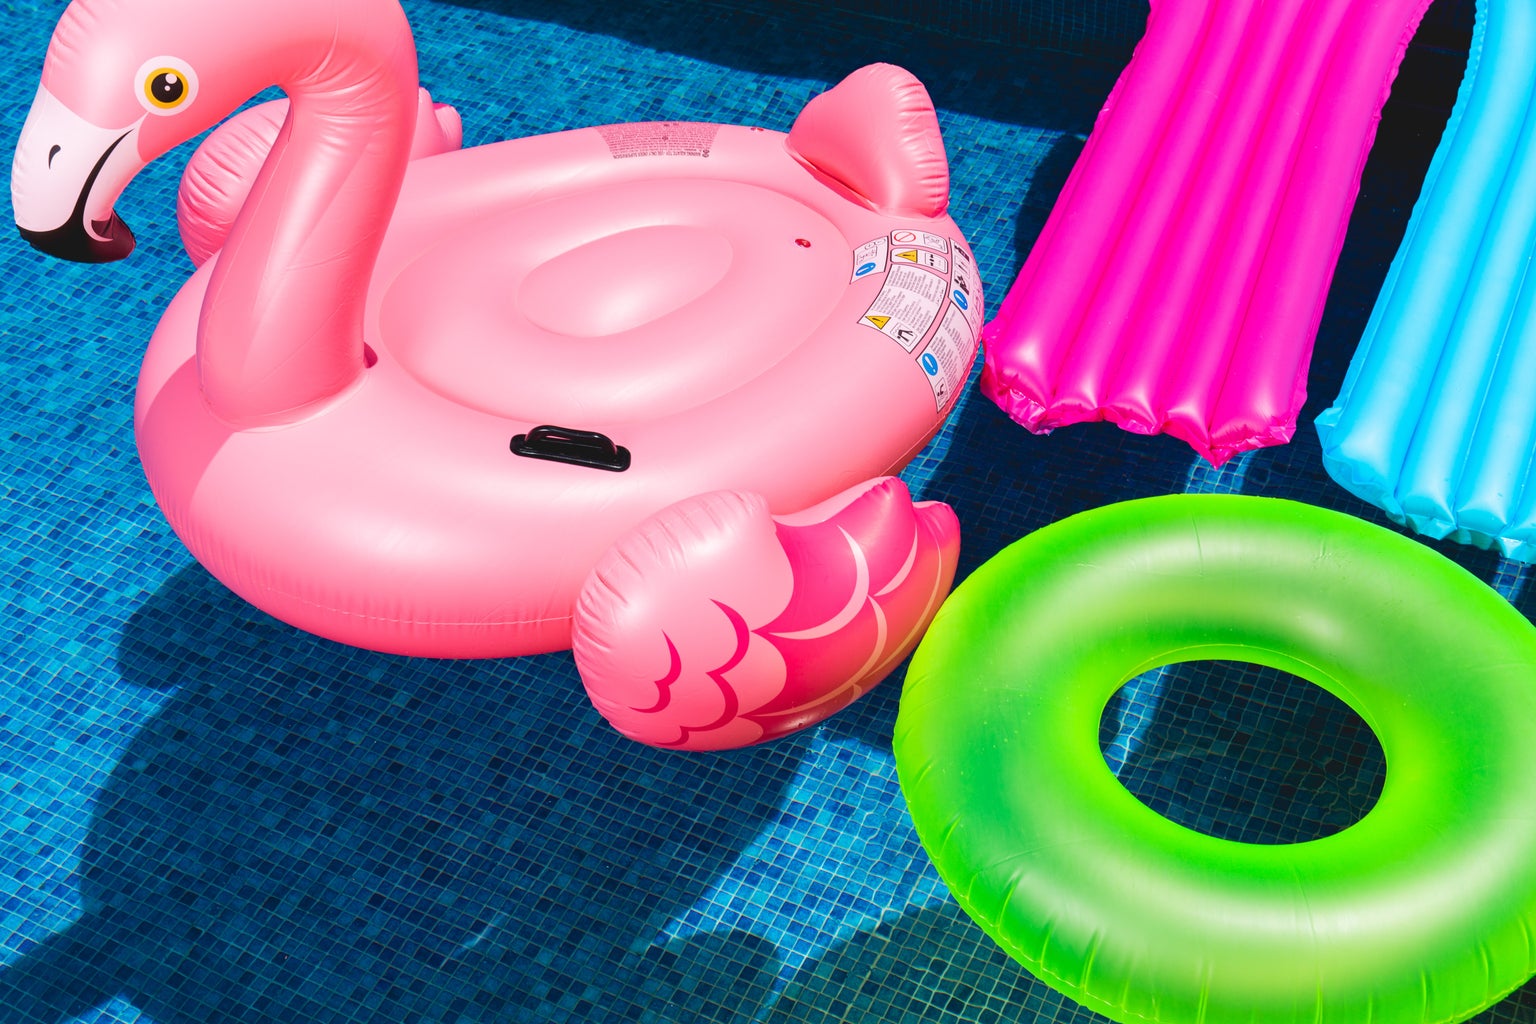 Pink inflatable flamingo in pool next to neon green inflatable.